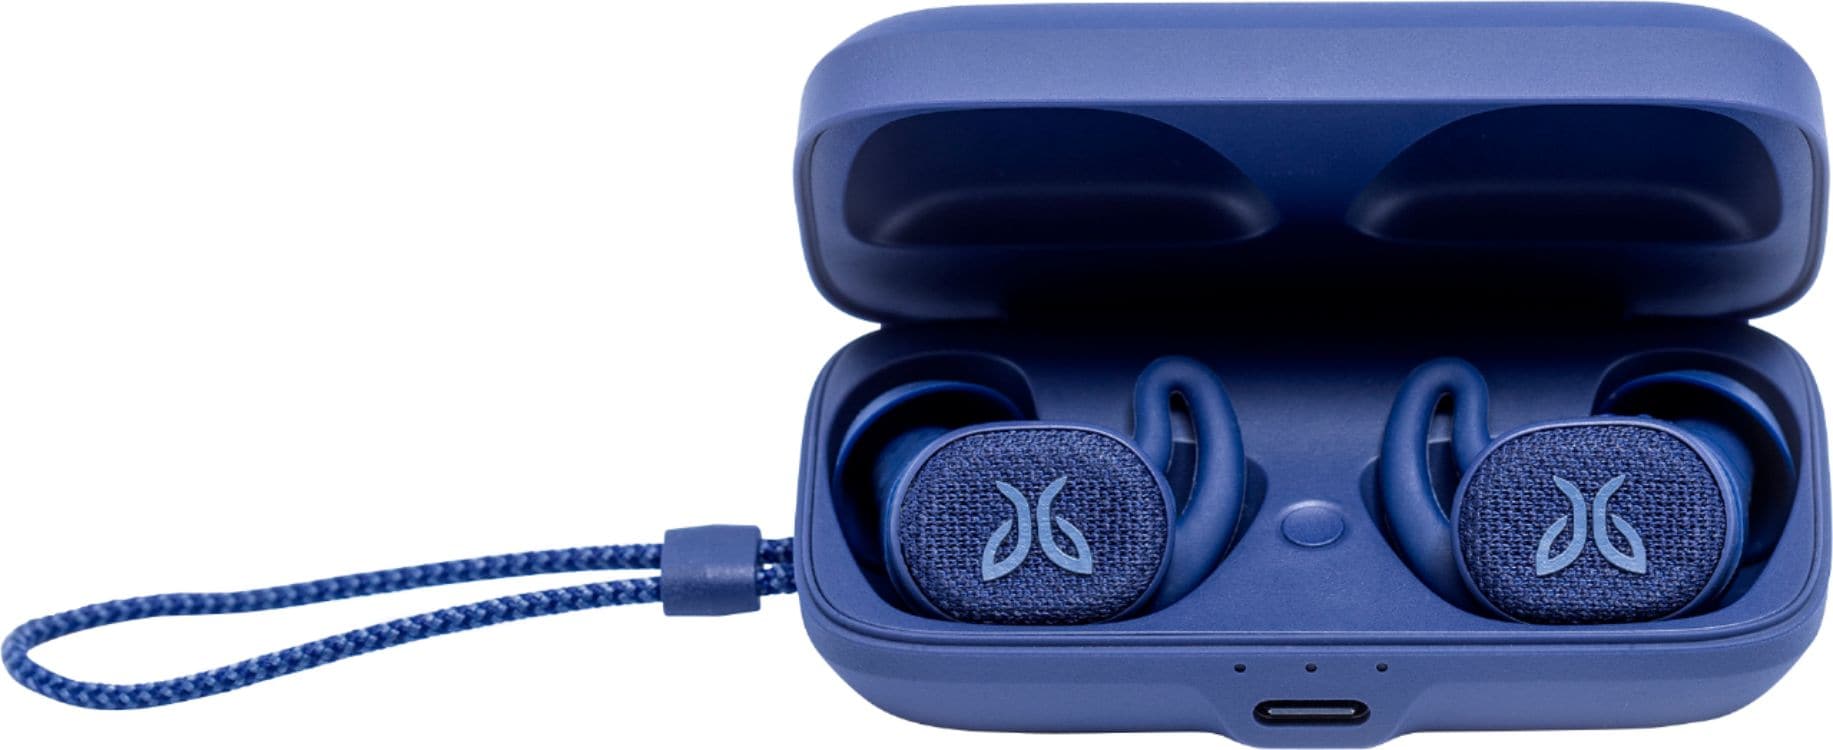 Jaybird Vista 2 - True wireless earphones with mic - in-ear - Bluetooth - active noise canceling - noise isolating - midnight - image 2 of 2